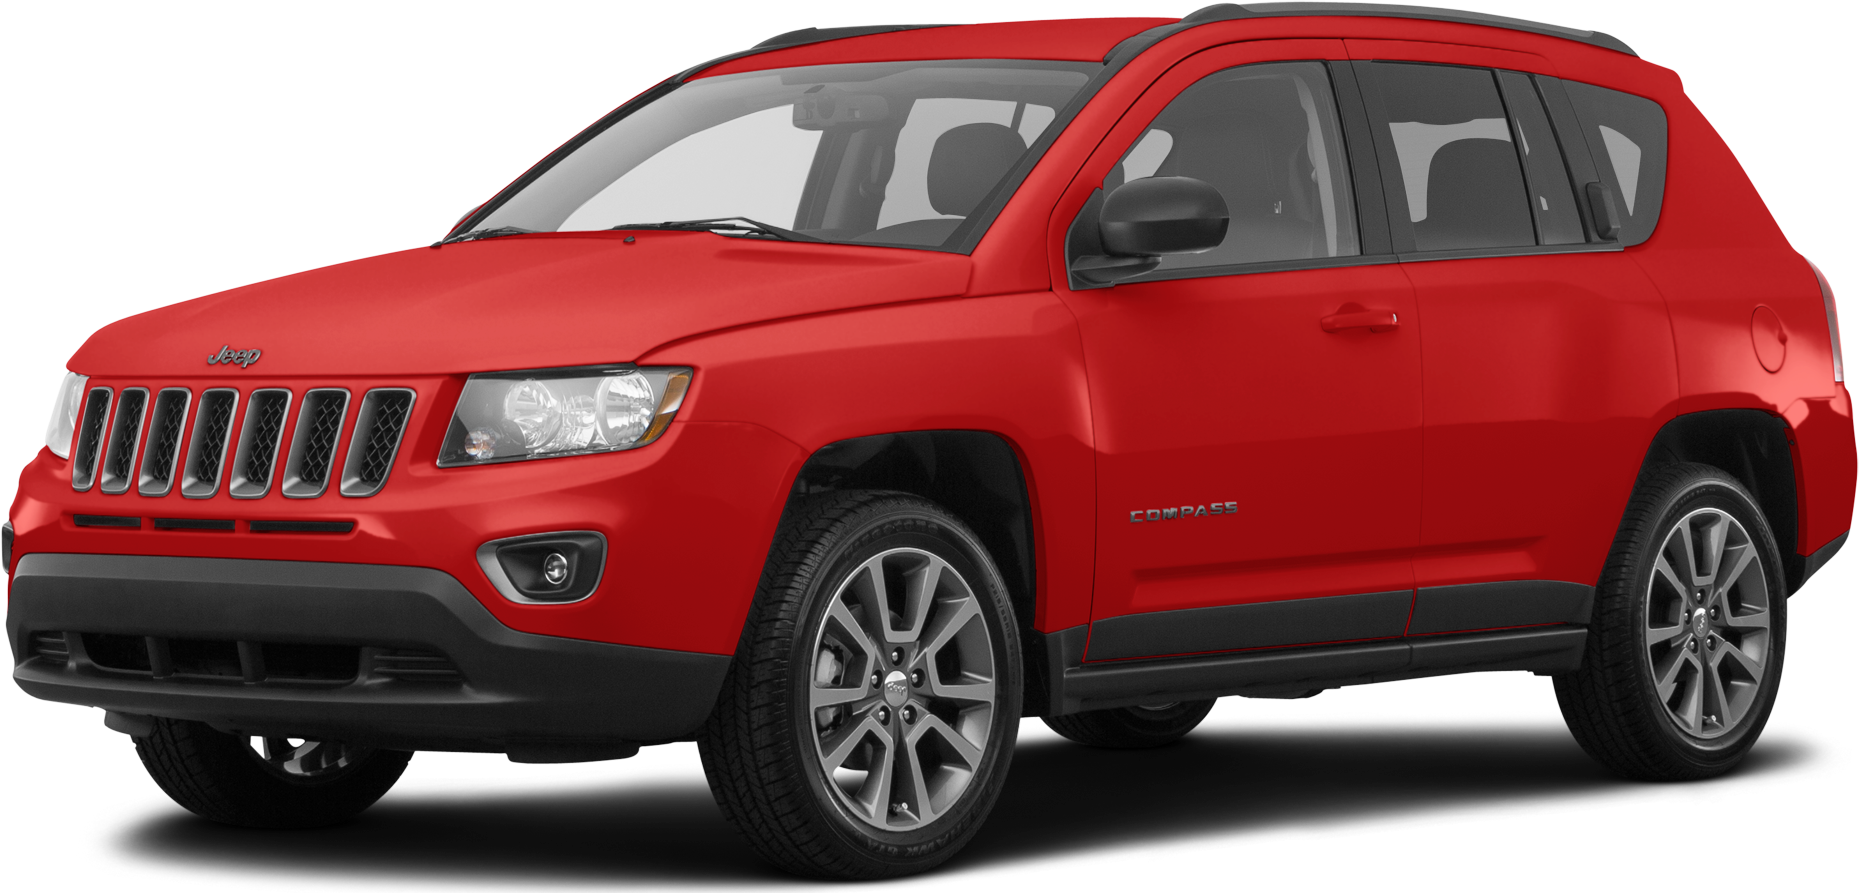 17 Jeep Compass Price Kbb Value Cars For Sale Kelley Blue Book